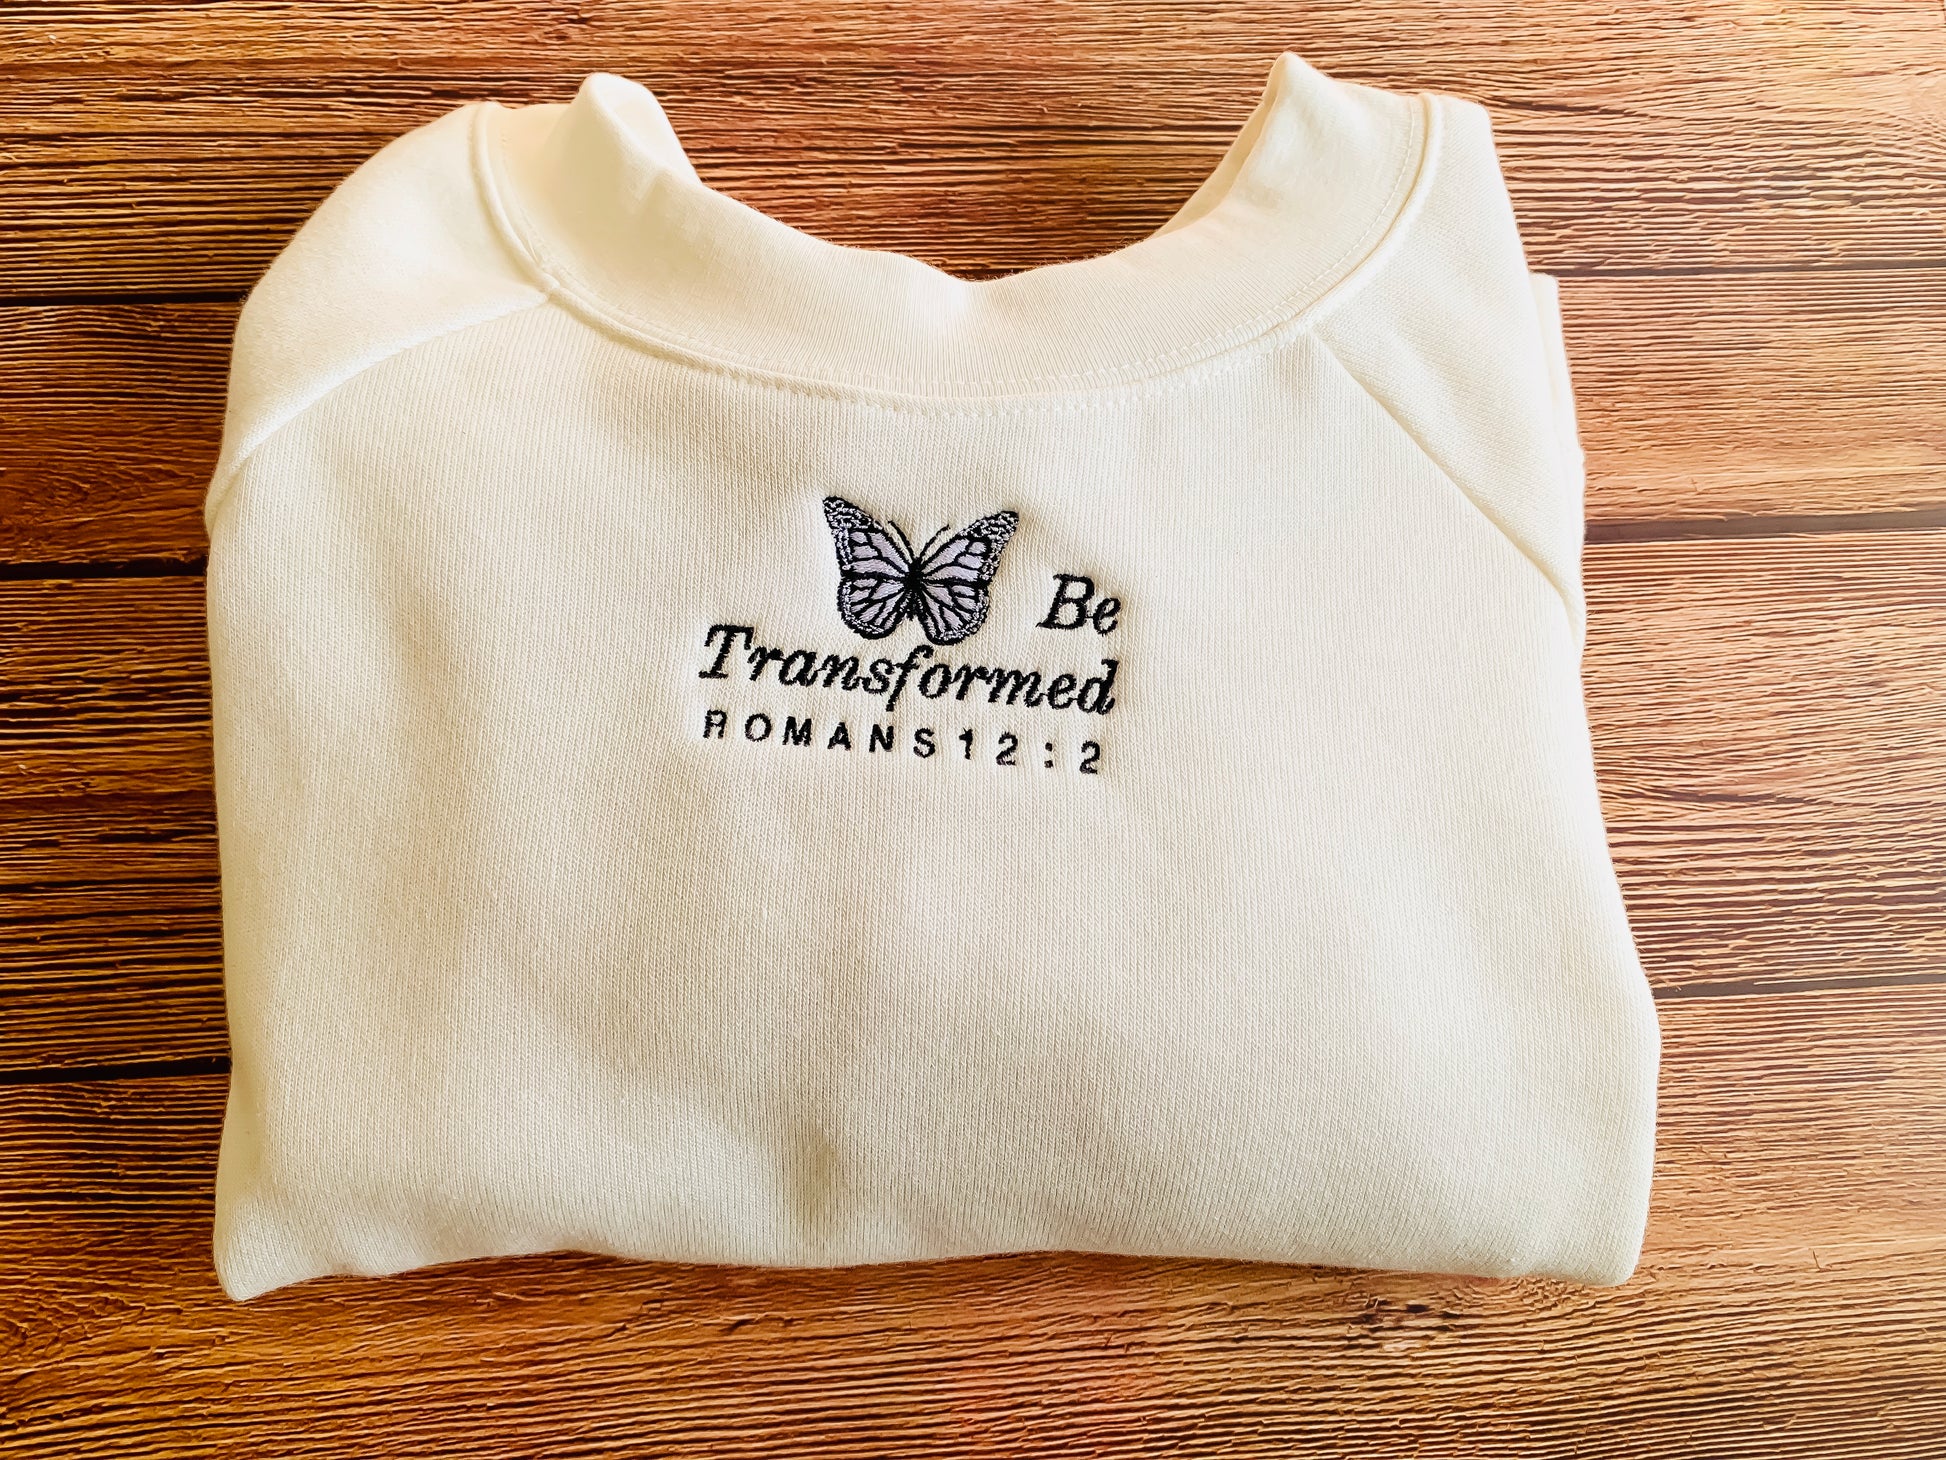 Be Transformed Embroidered Sweatshirt - DRESS FOR THE KING